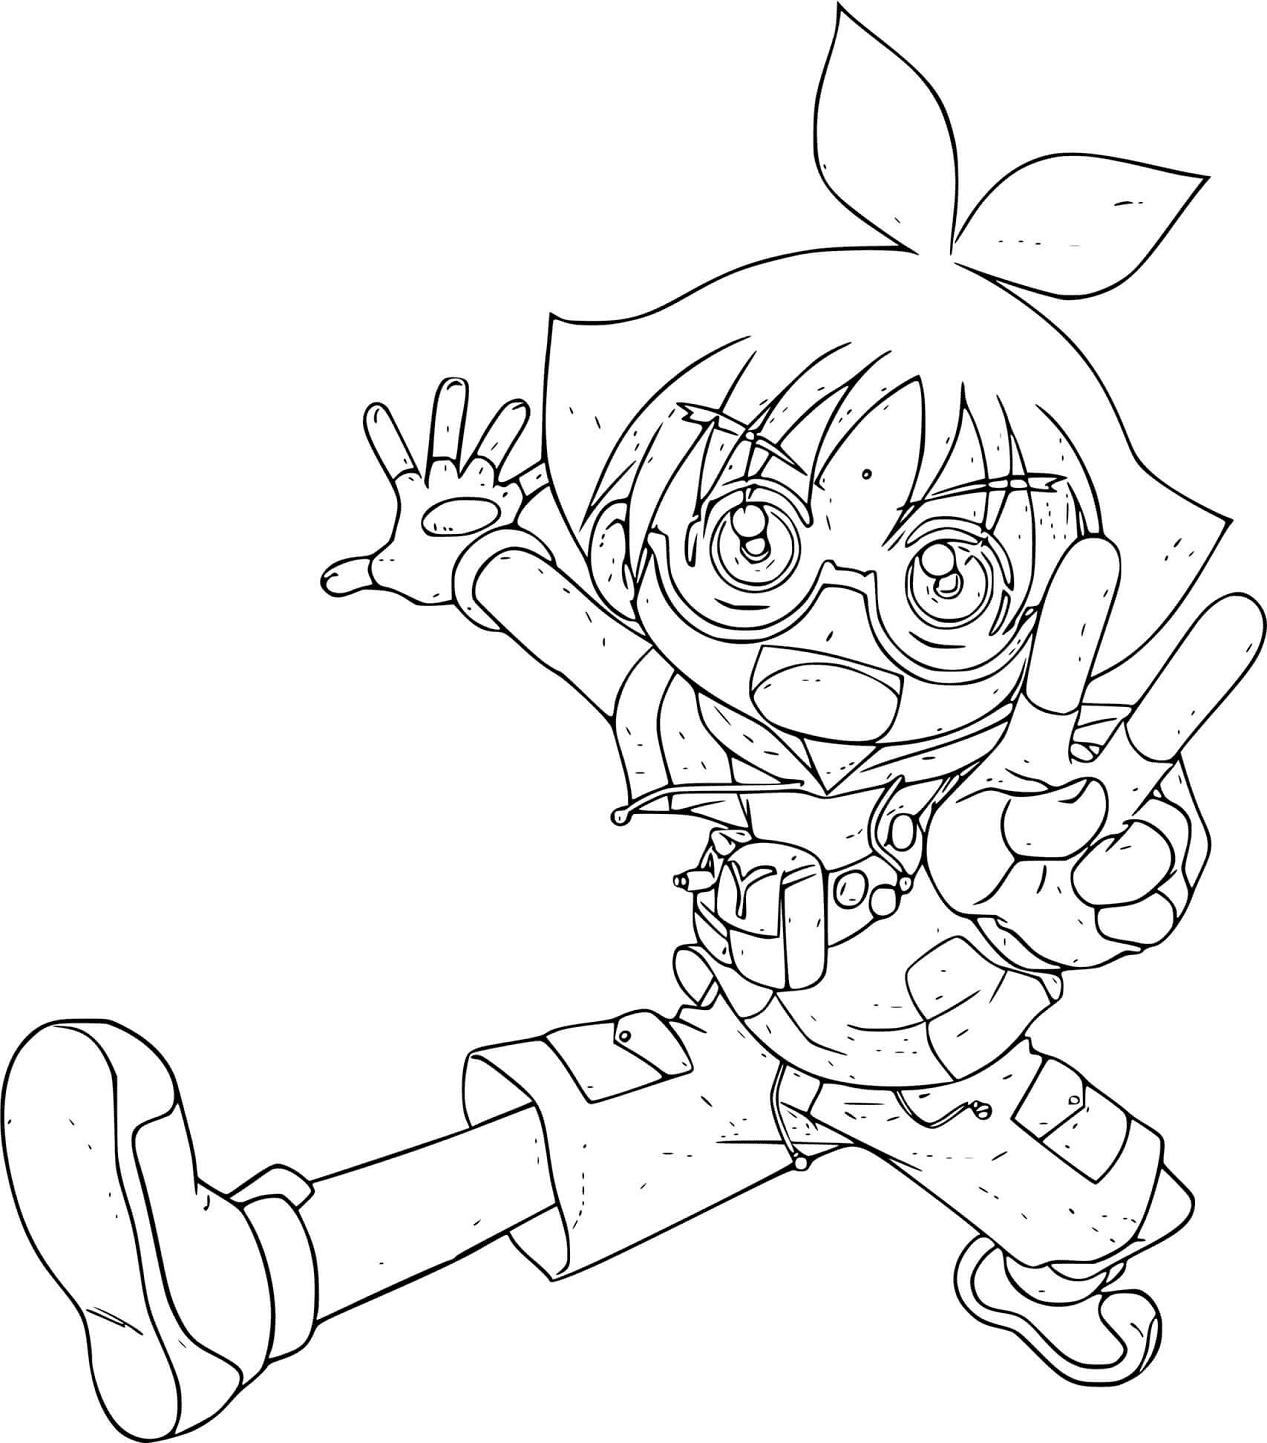 Marucho Coloring Pages